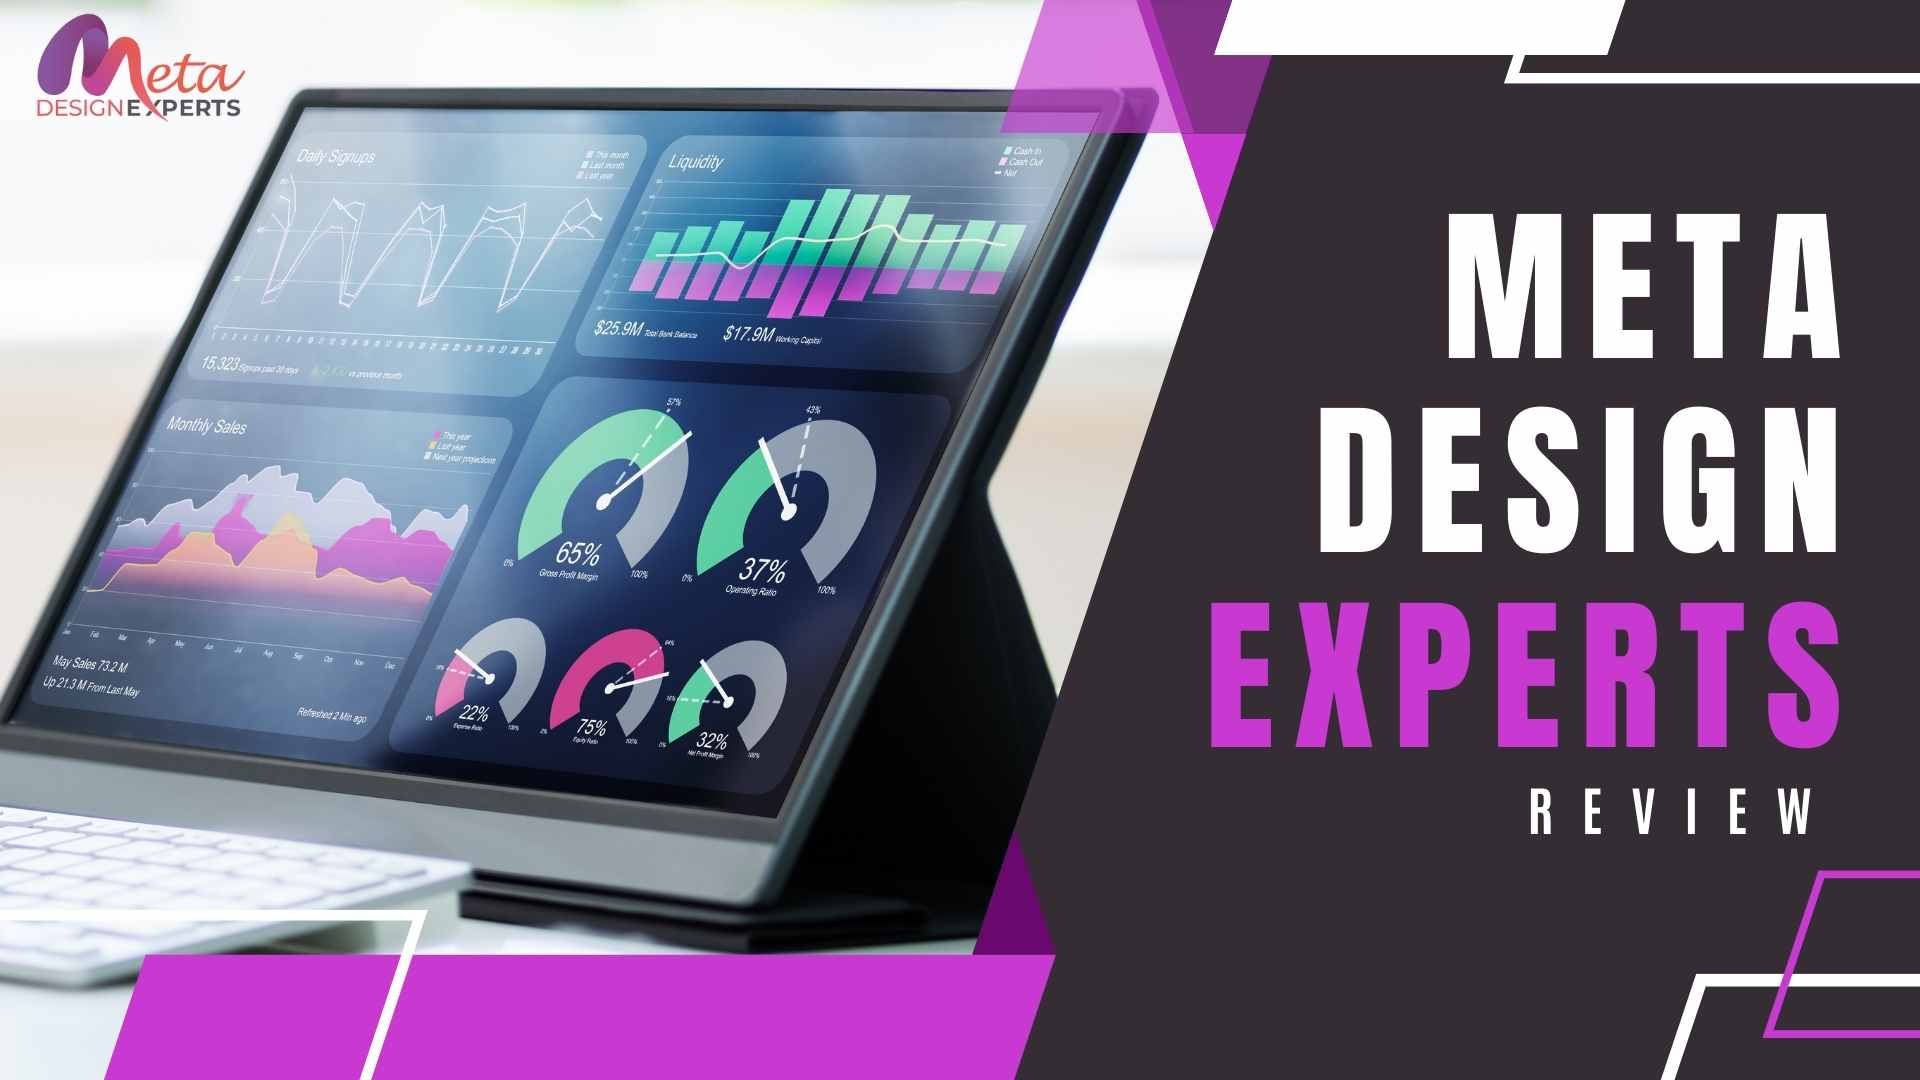 Meta Design Experts Review: The best marketing agency in tx?